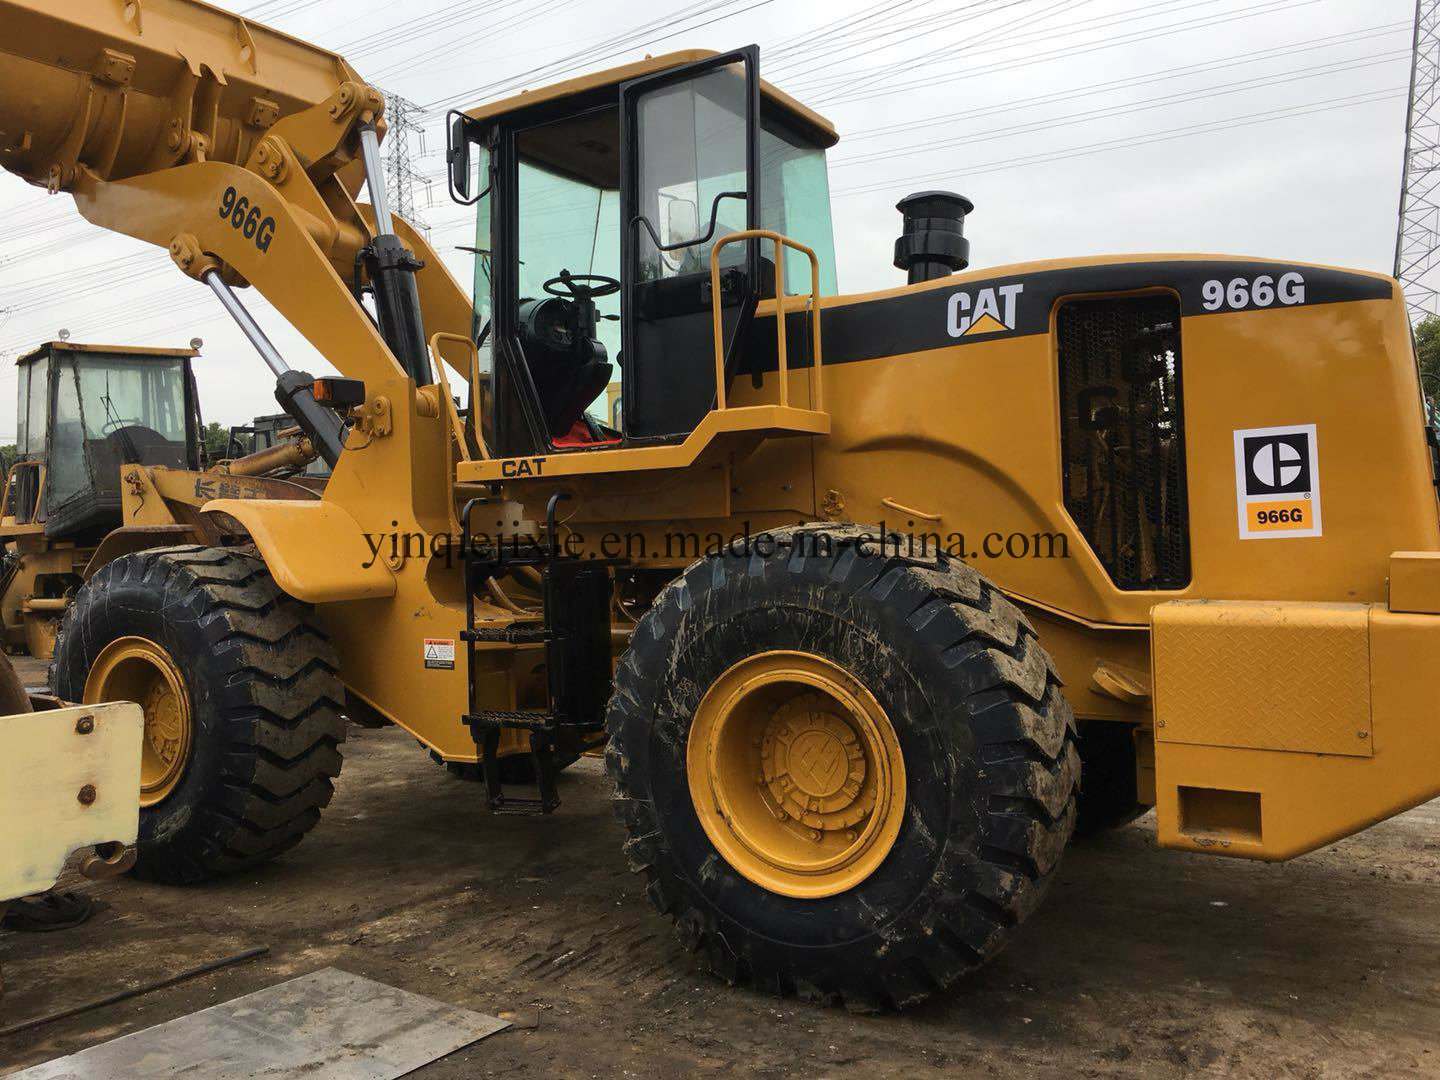 Japan Caterpillar Wheel Loader 966g with Good Condition/High Quality 966g Wheel Loader for Sale